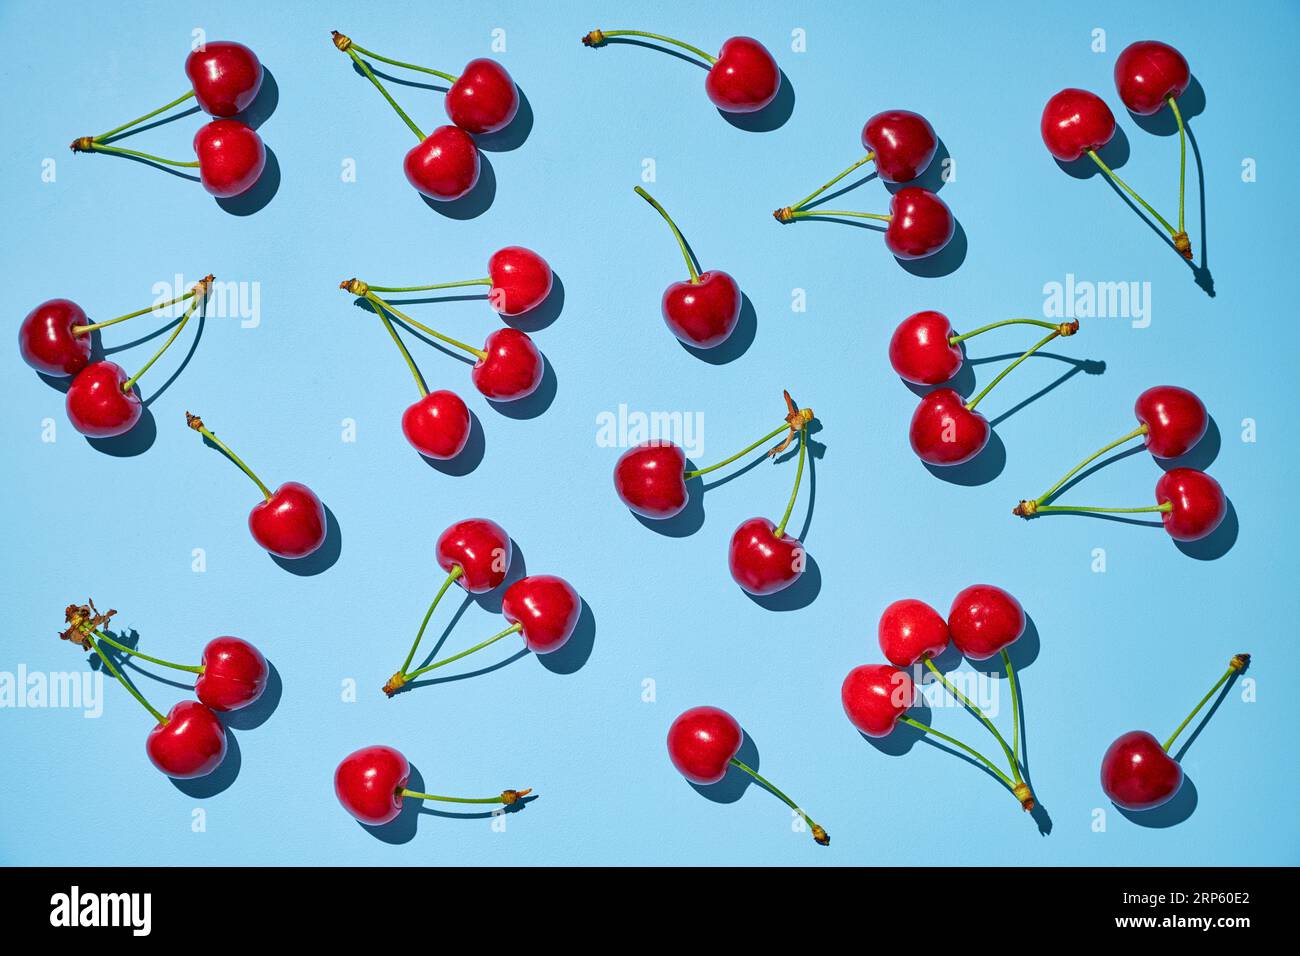 Fresh ripe red cherry with stalks on the blue background. Flat lay. Stock Photo